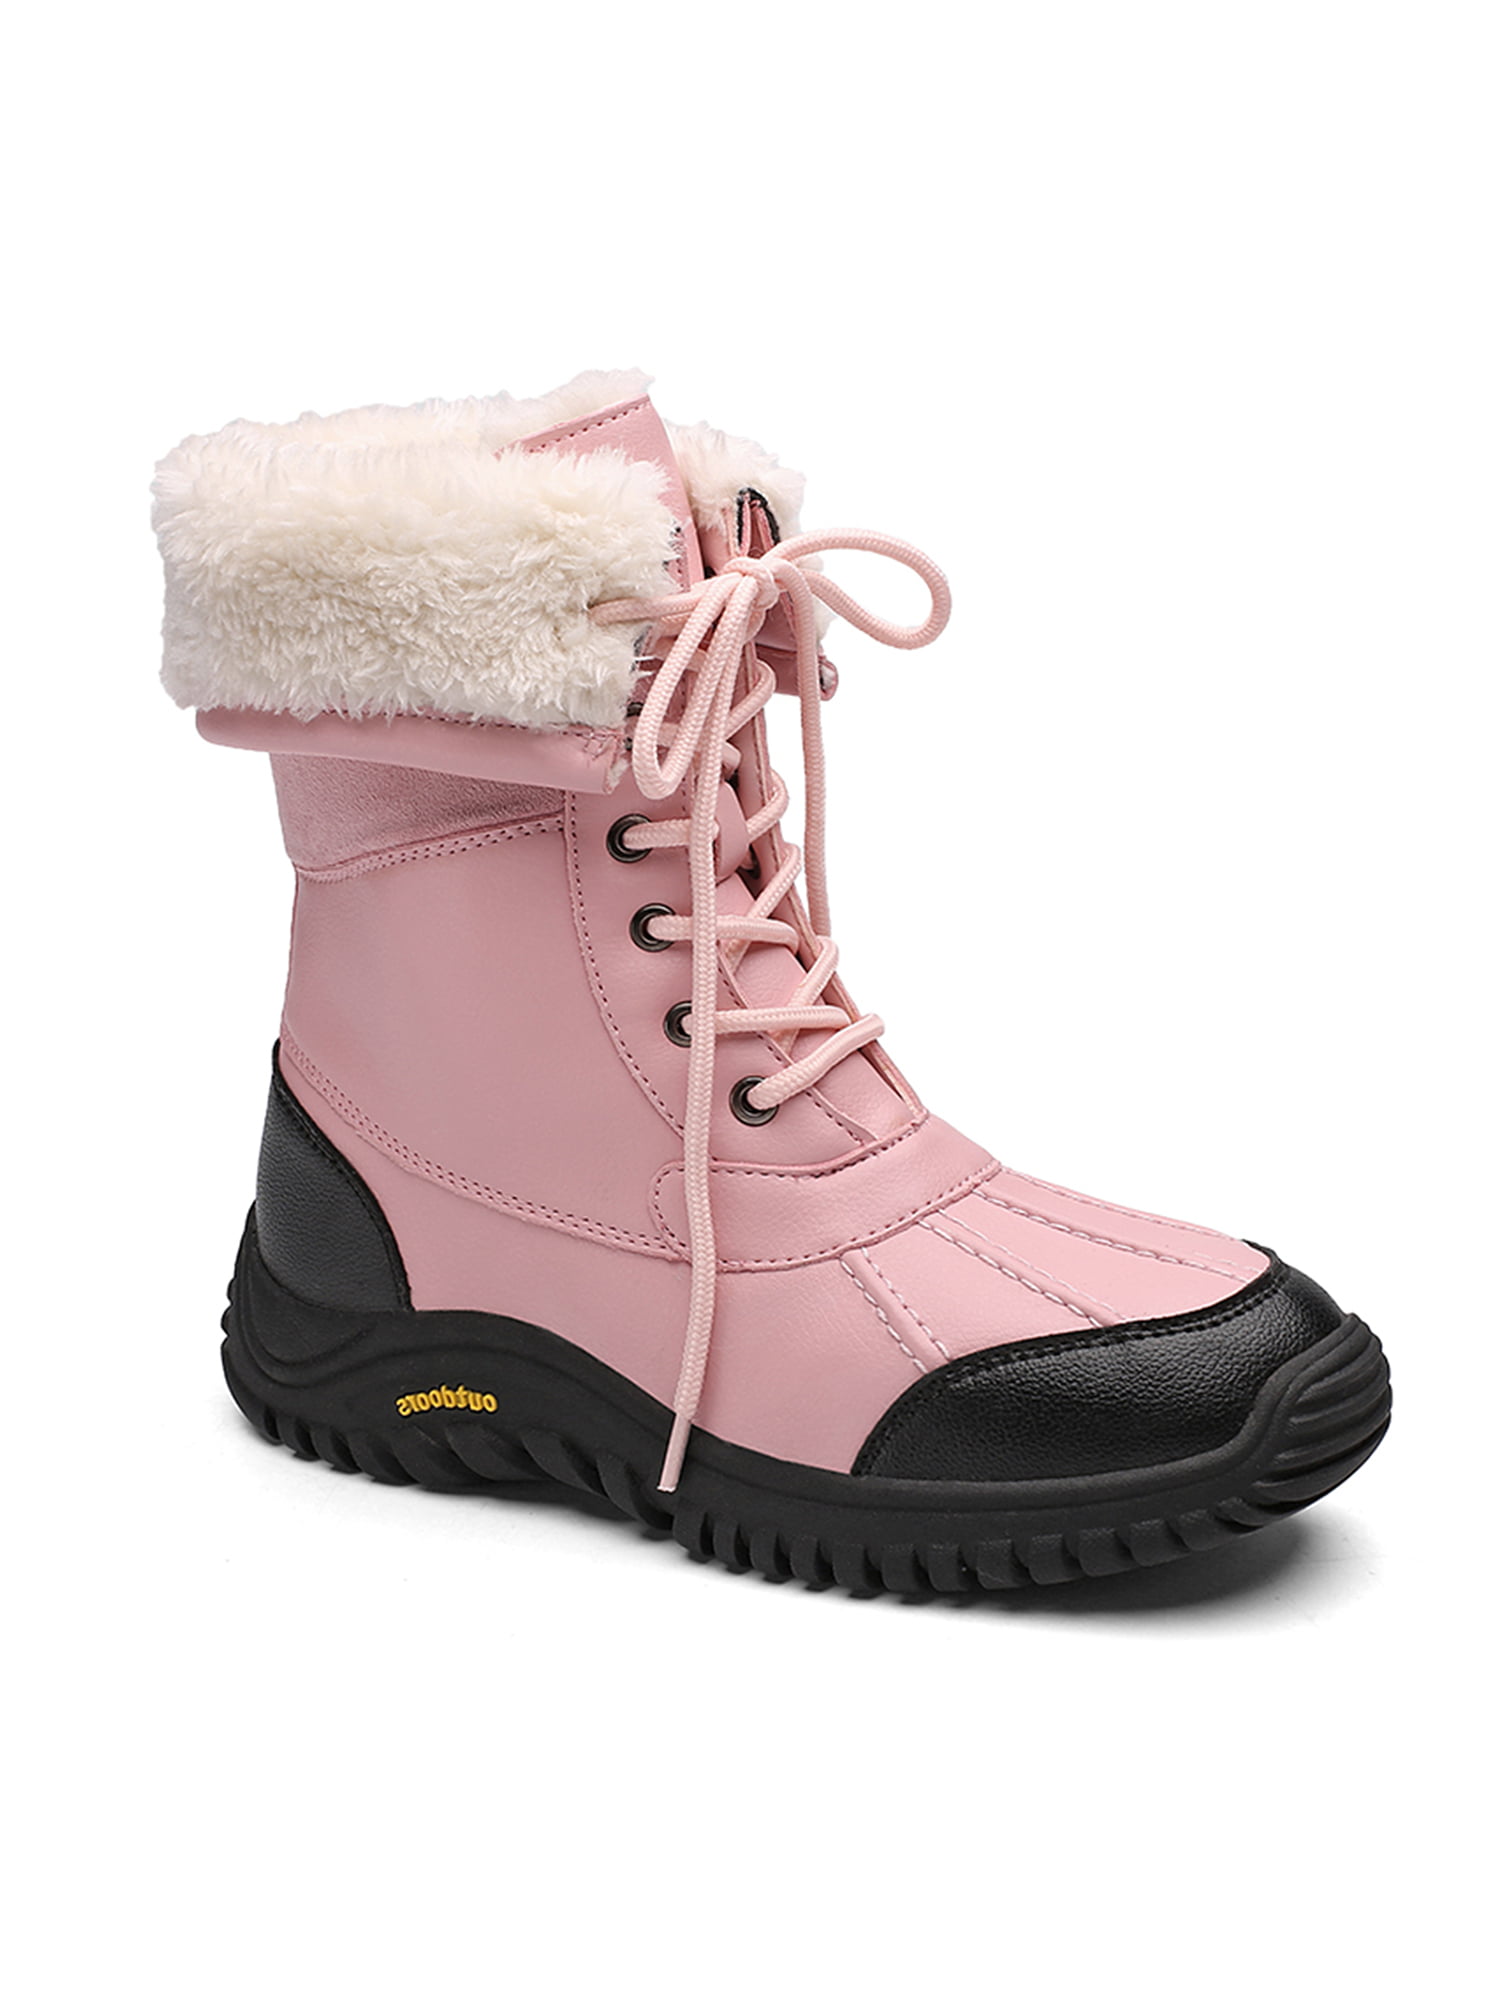 Tanleewa Snow Boots for Women Fashion Mid-Calf Winter Boots 8.5 Female ...